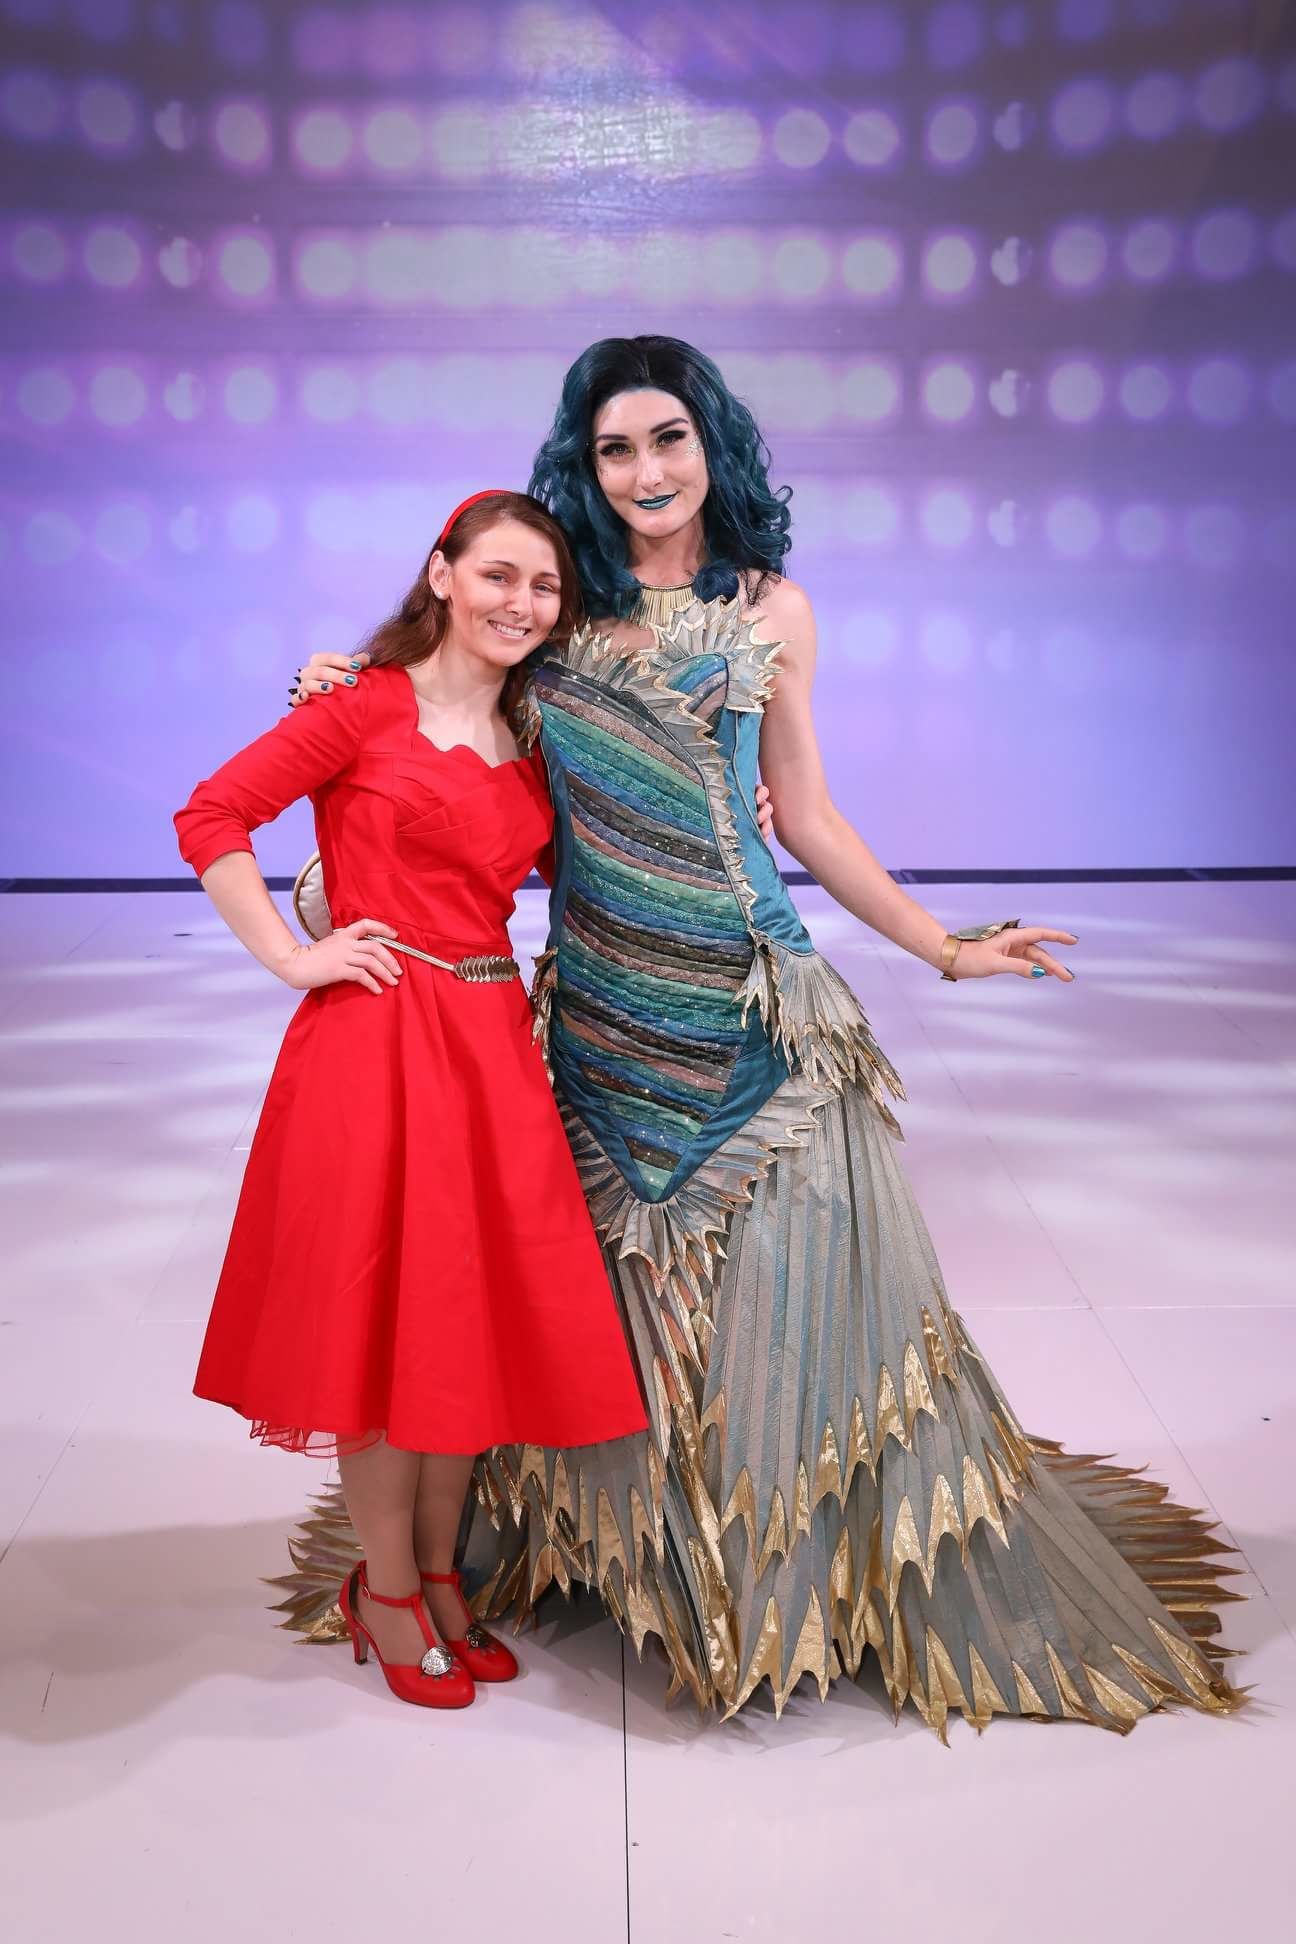 Designer Cynthia Kirkland With Model Wearing Her Shape of Water Costume